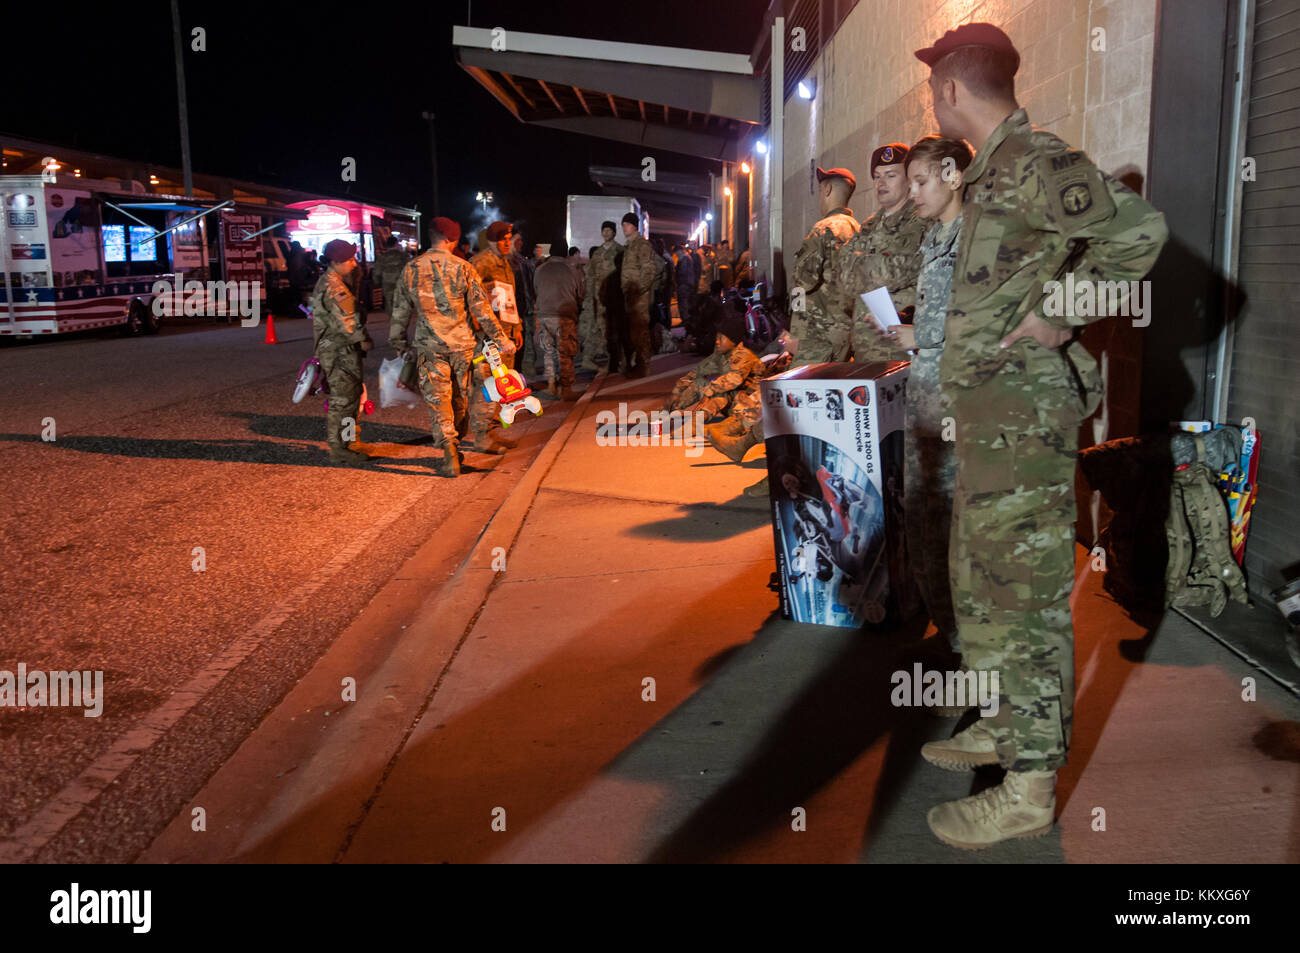 Fort Bragg, NC, USA. 1st Dec, 2017. Dec. 1, 2017 - FORT BRAGG, N.C., USA - Paratroopers line the street at Green Ramp on Pope Army Airfield, Friday, before the sun rises, waiting to donate their toys at the 20th Annual Randy Oler Memorial Operation Toy Drop. The airborne operation, hosted by the U.S. Army Civil Affairs & Psychological Operations Command (Airborne), is the world's largest combined airborne operation with paratroopers from nine allied nations participating. The annual event allows paratroopers the opportunity to help children in communities surrounding Fort Bragg Stock Photo